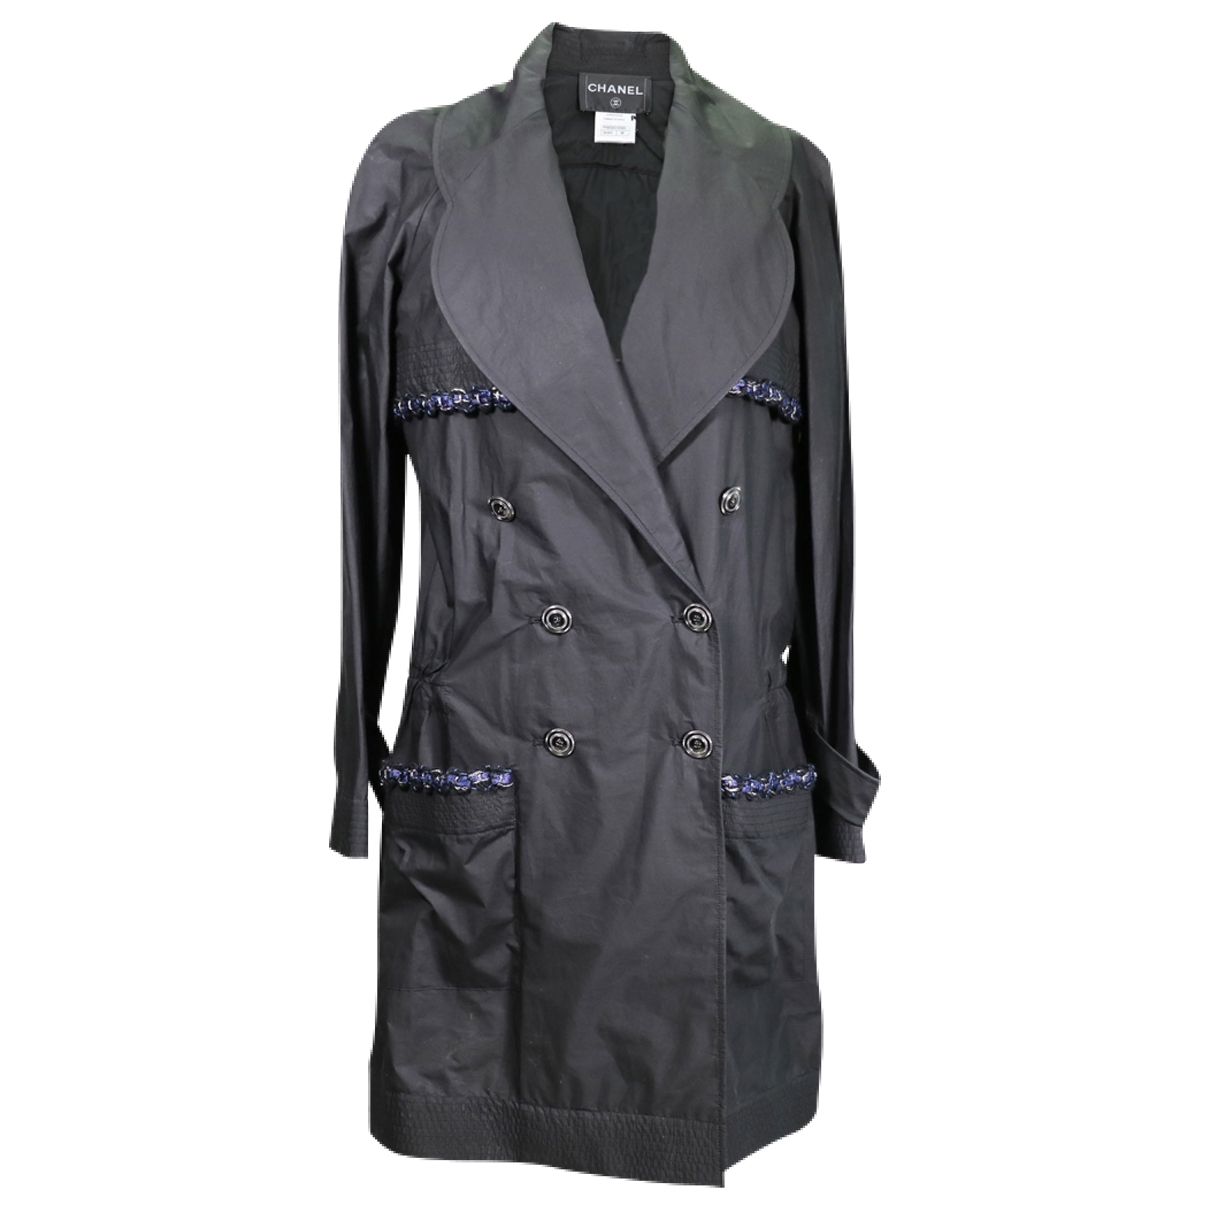 Trench coat Max 68% OFF Animer and price revision